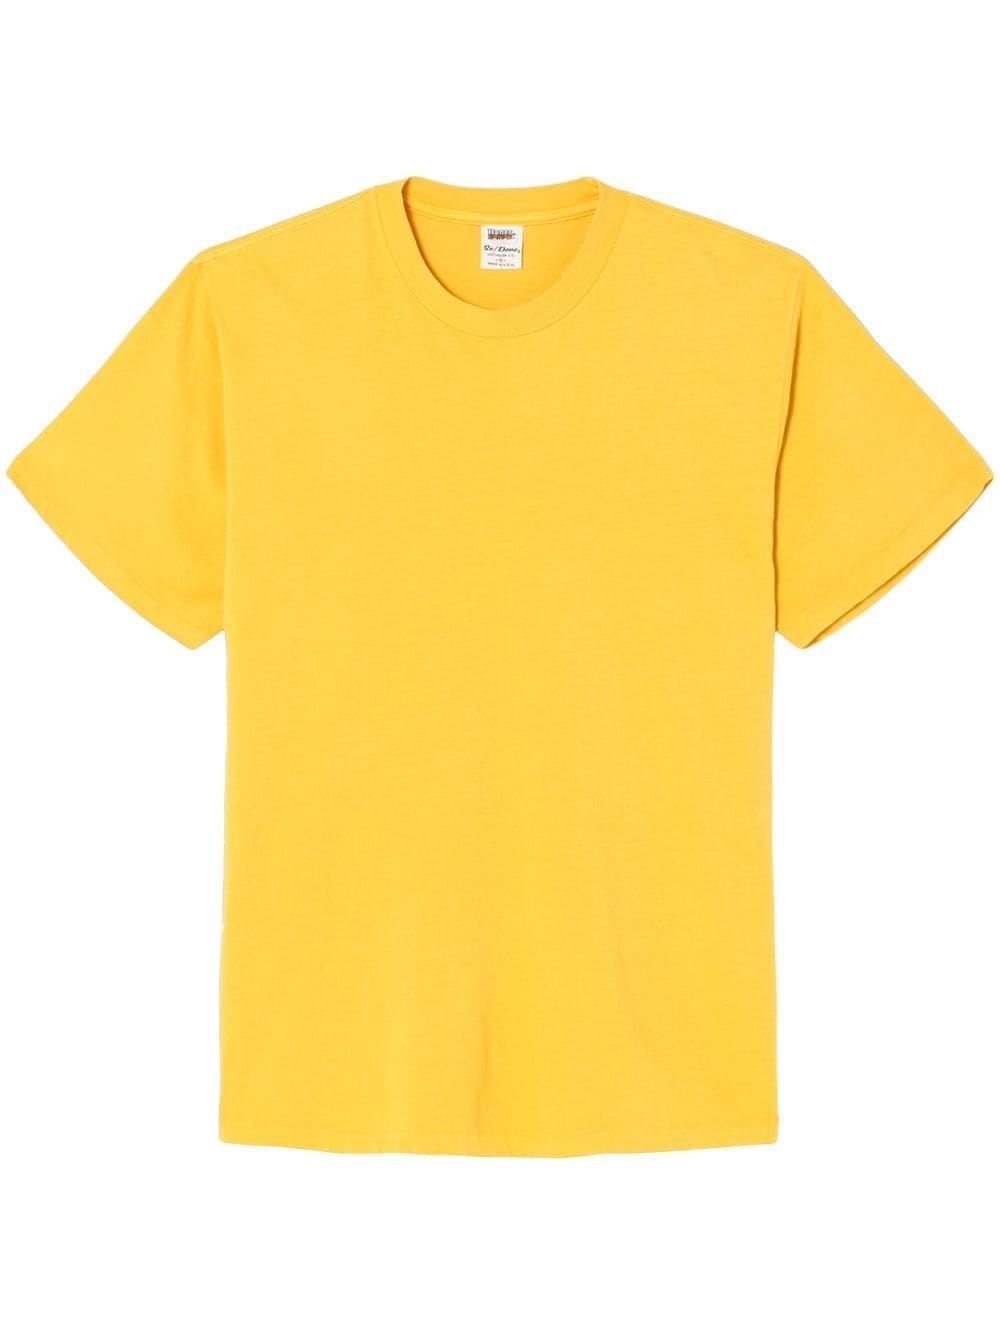 RE/DONE loose-fit crew neck T-shirt - Yellow von RE/DONE